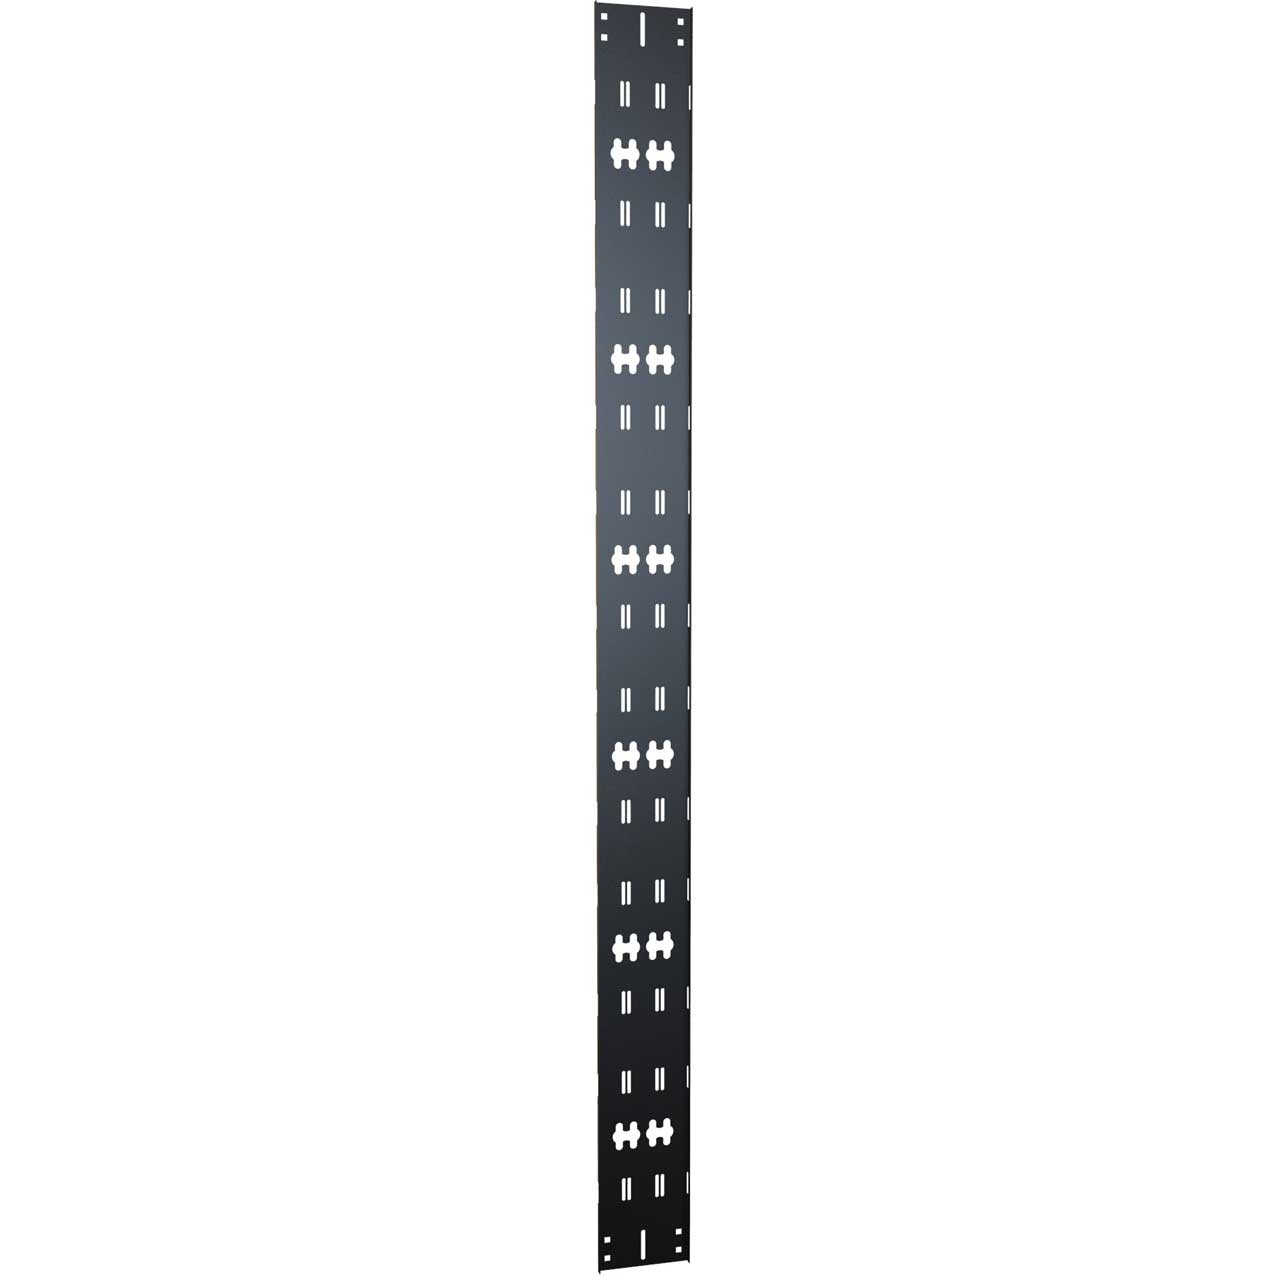 Hammond VCTPDU78 45RU Vertical Cable Tray with PDU Mounting VCTPDU78